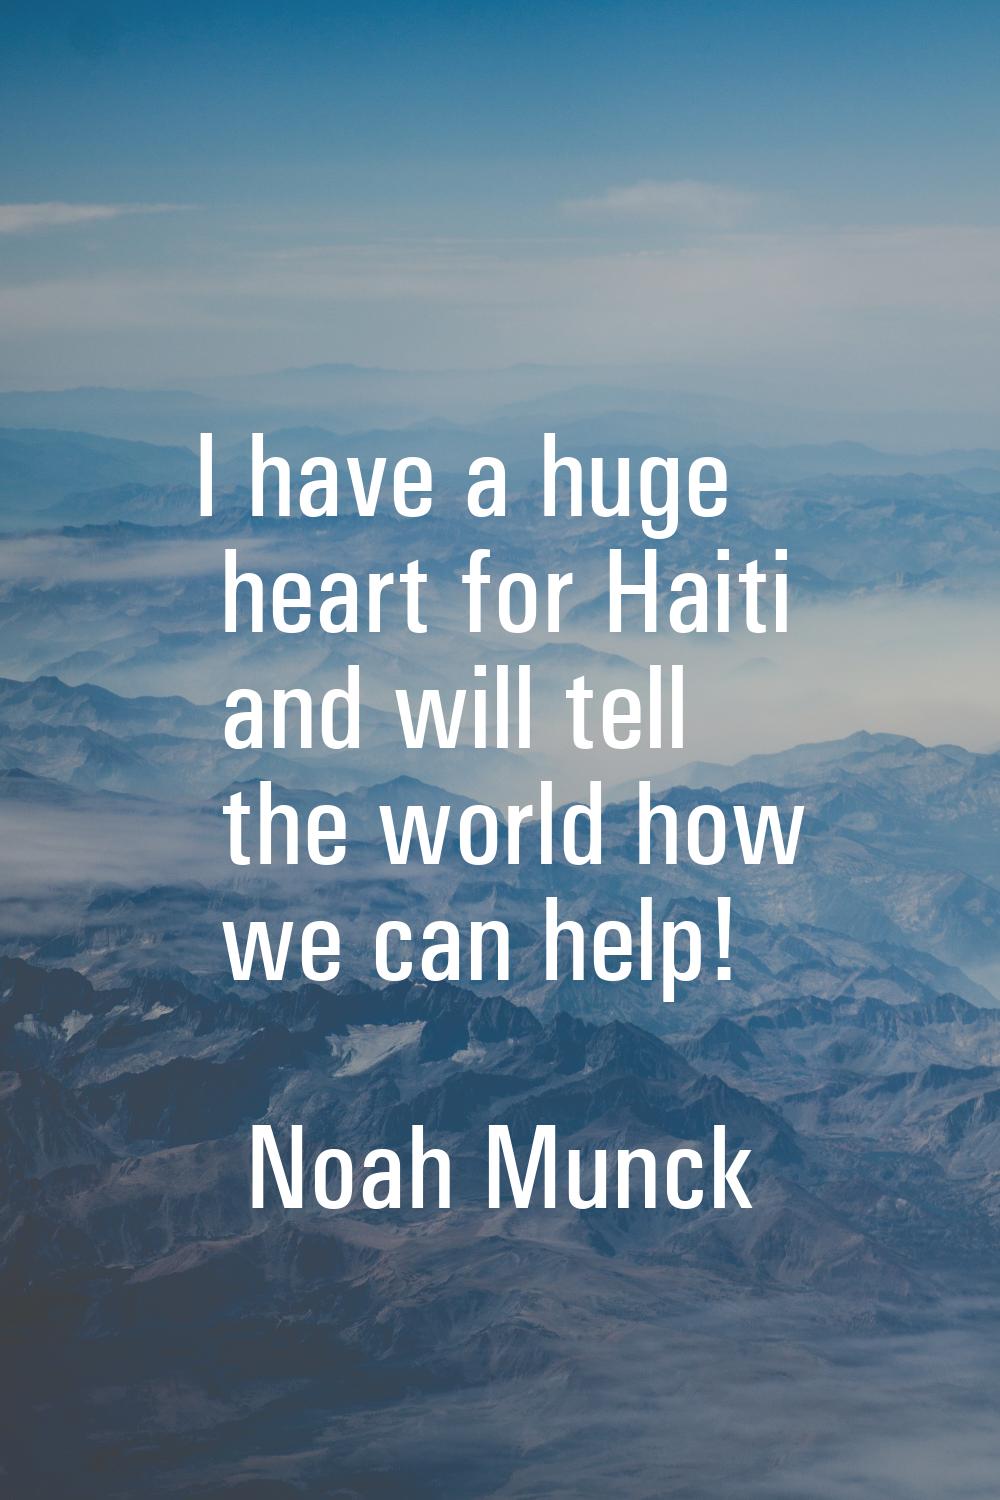 I have a huge heart for Haiti and will tell the world how we can help!